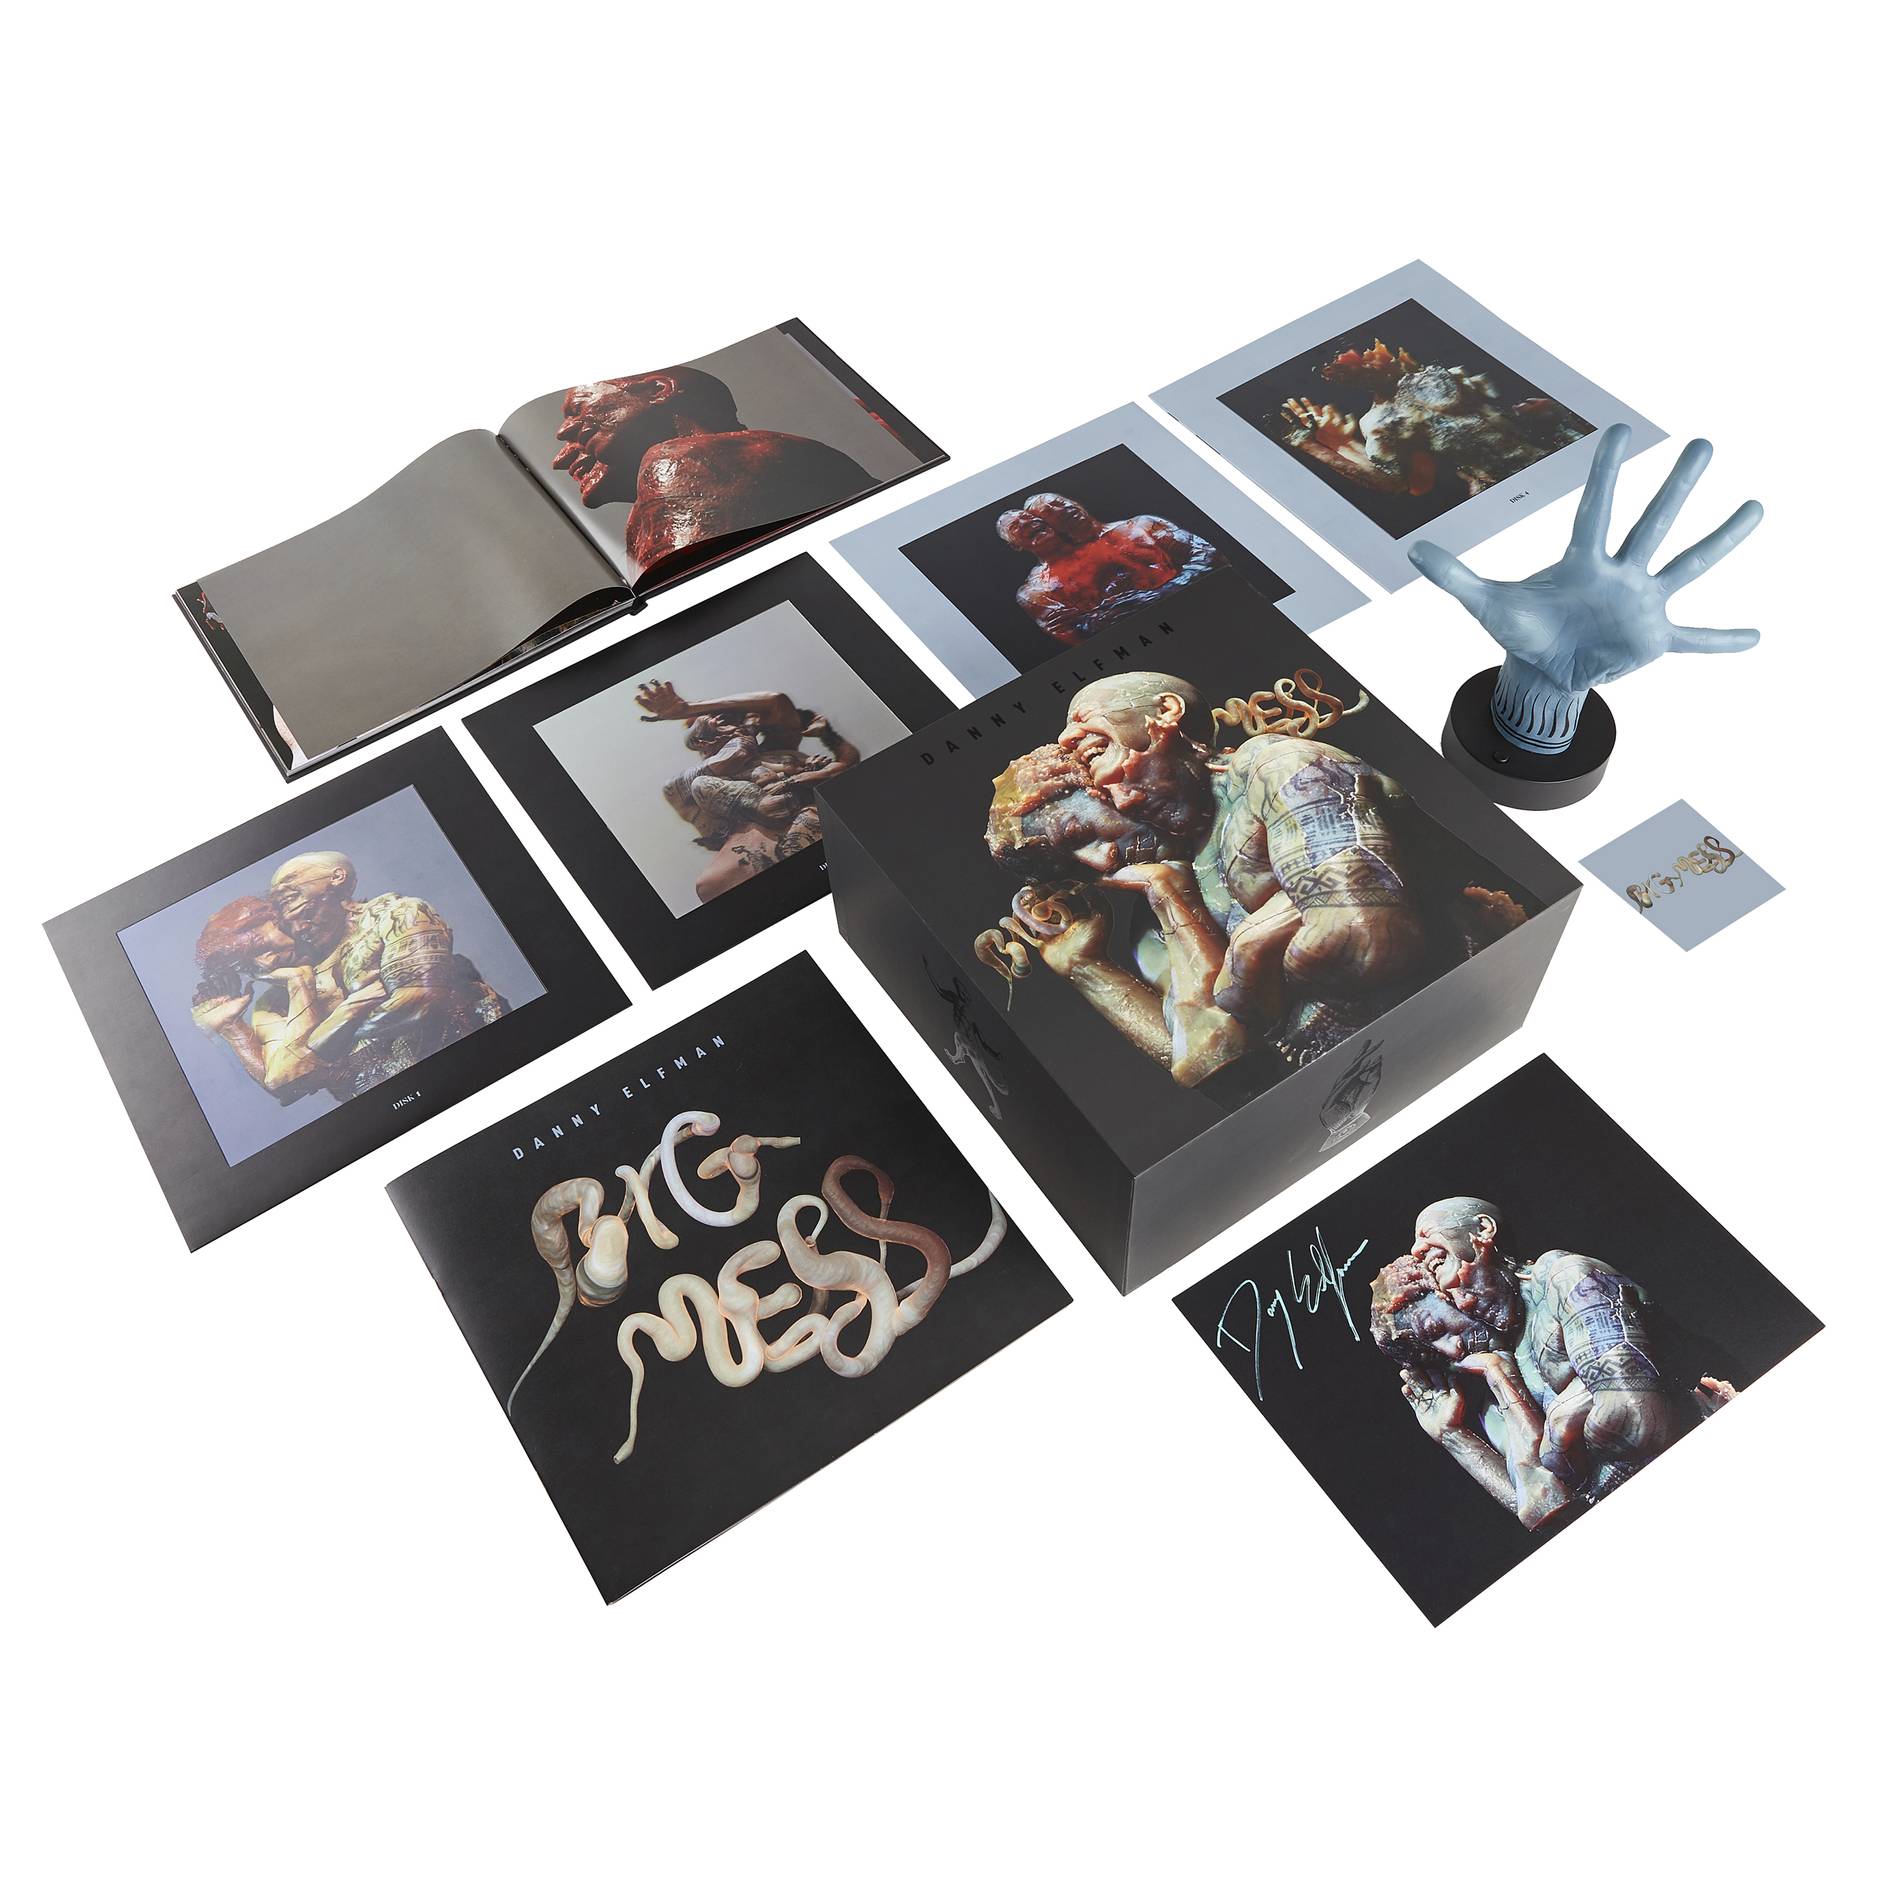 Danny Elfman 'Big Mess' deluxe box set laid out